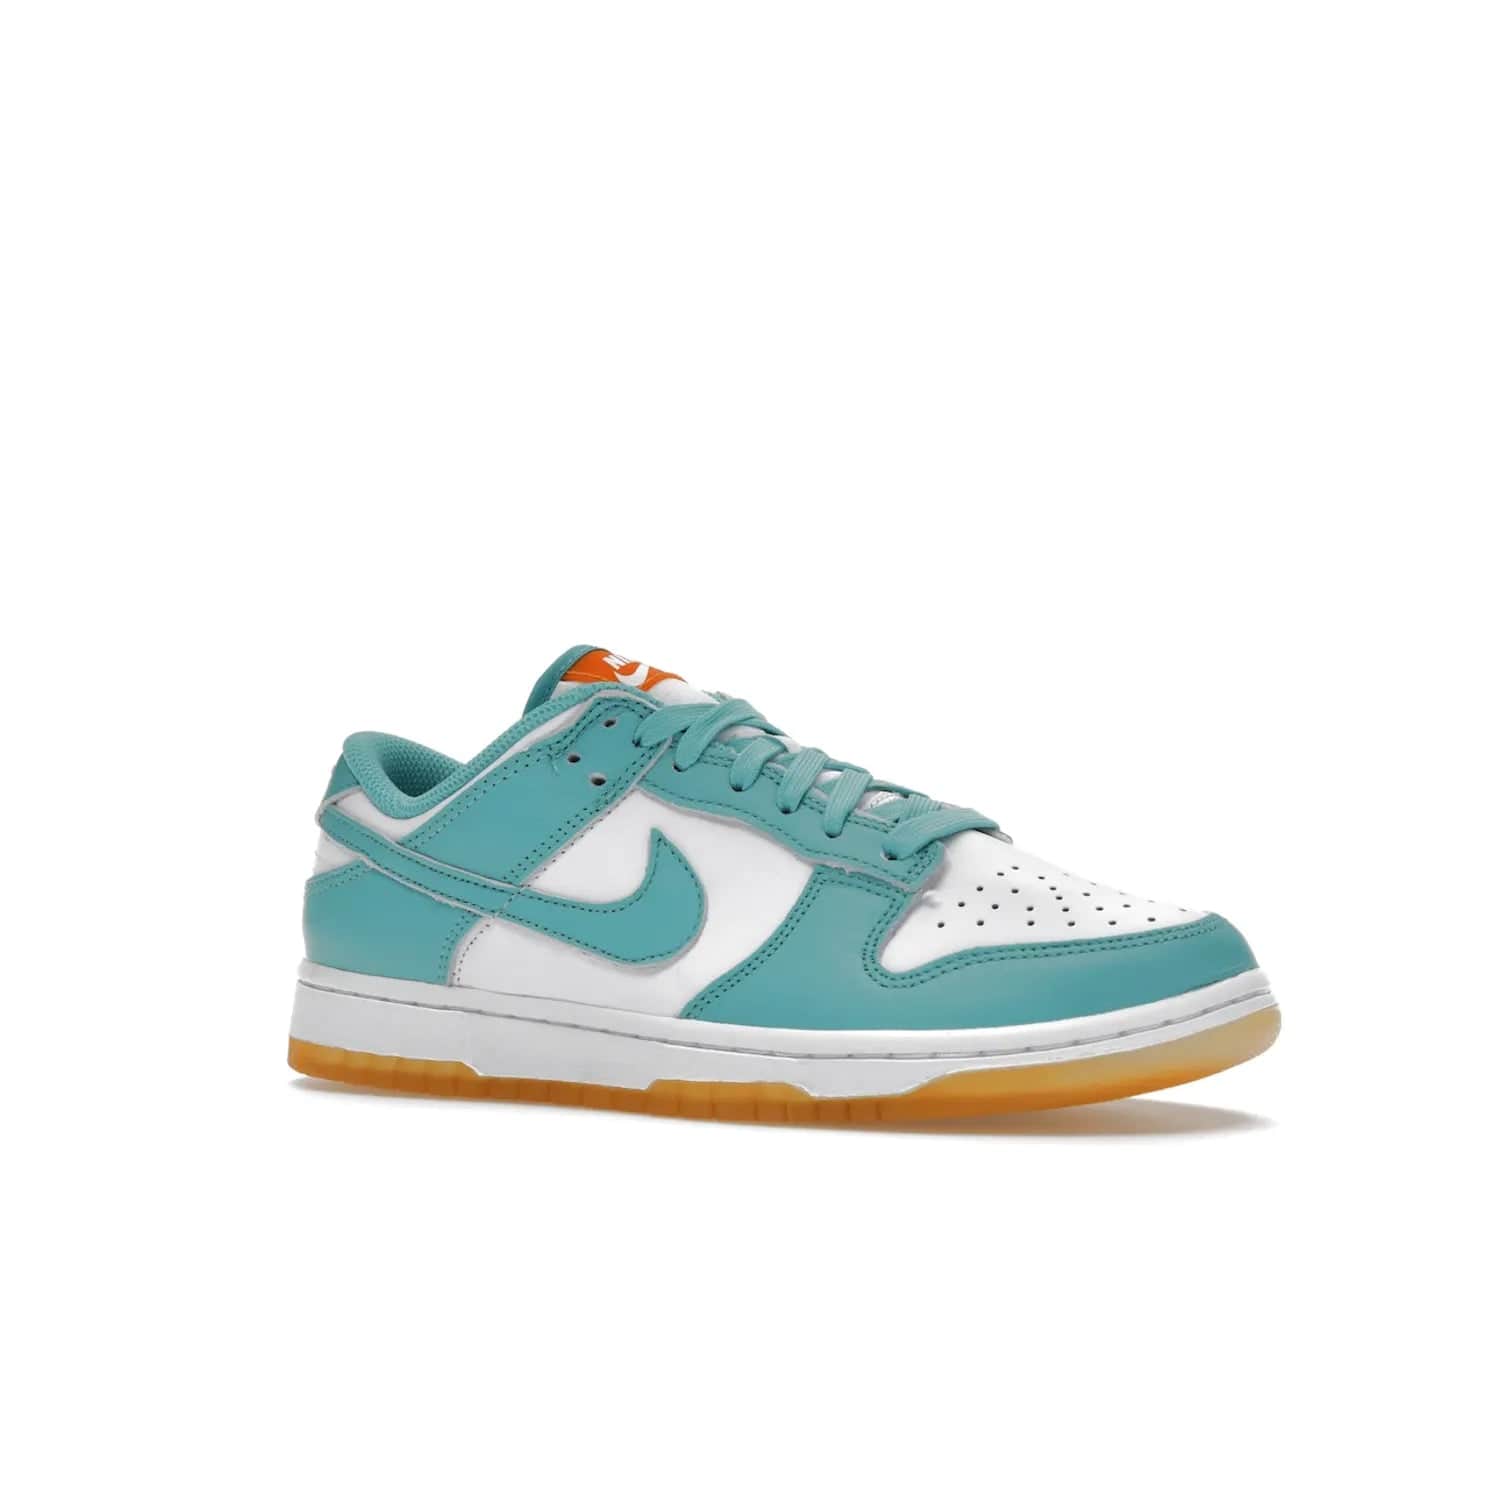 Nike Dunk Low Teal Zeal (Women's) - Image 4 - Only at www.BallersClubKickz.com - A white leather upper with teal overlays and Swooshes, plus yellow and embroidered accents make the Nike Dunk Low Teal Zeal (Women's) the perfect statement piece for any wardrobe.